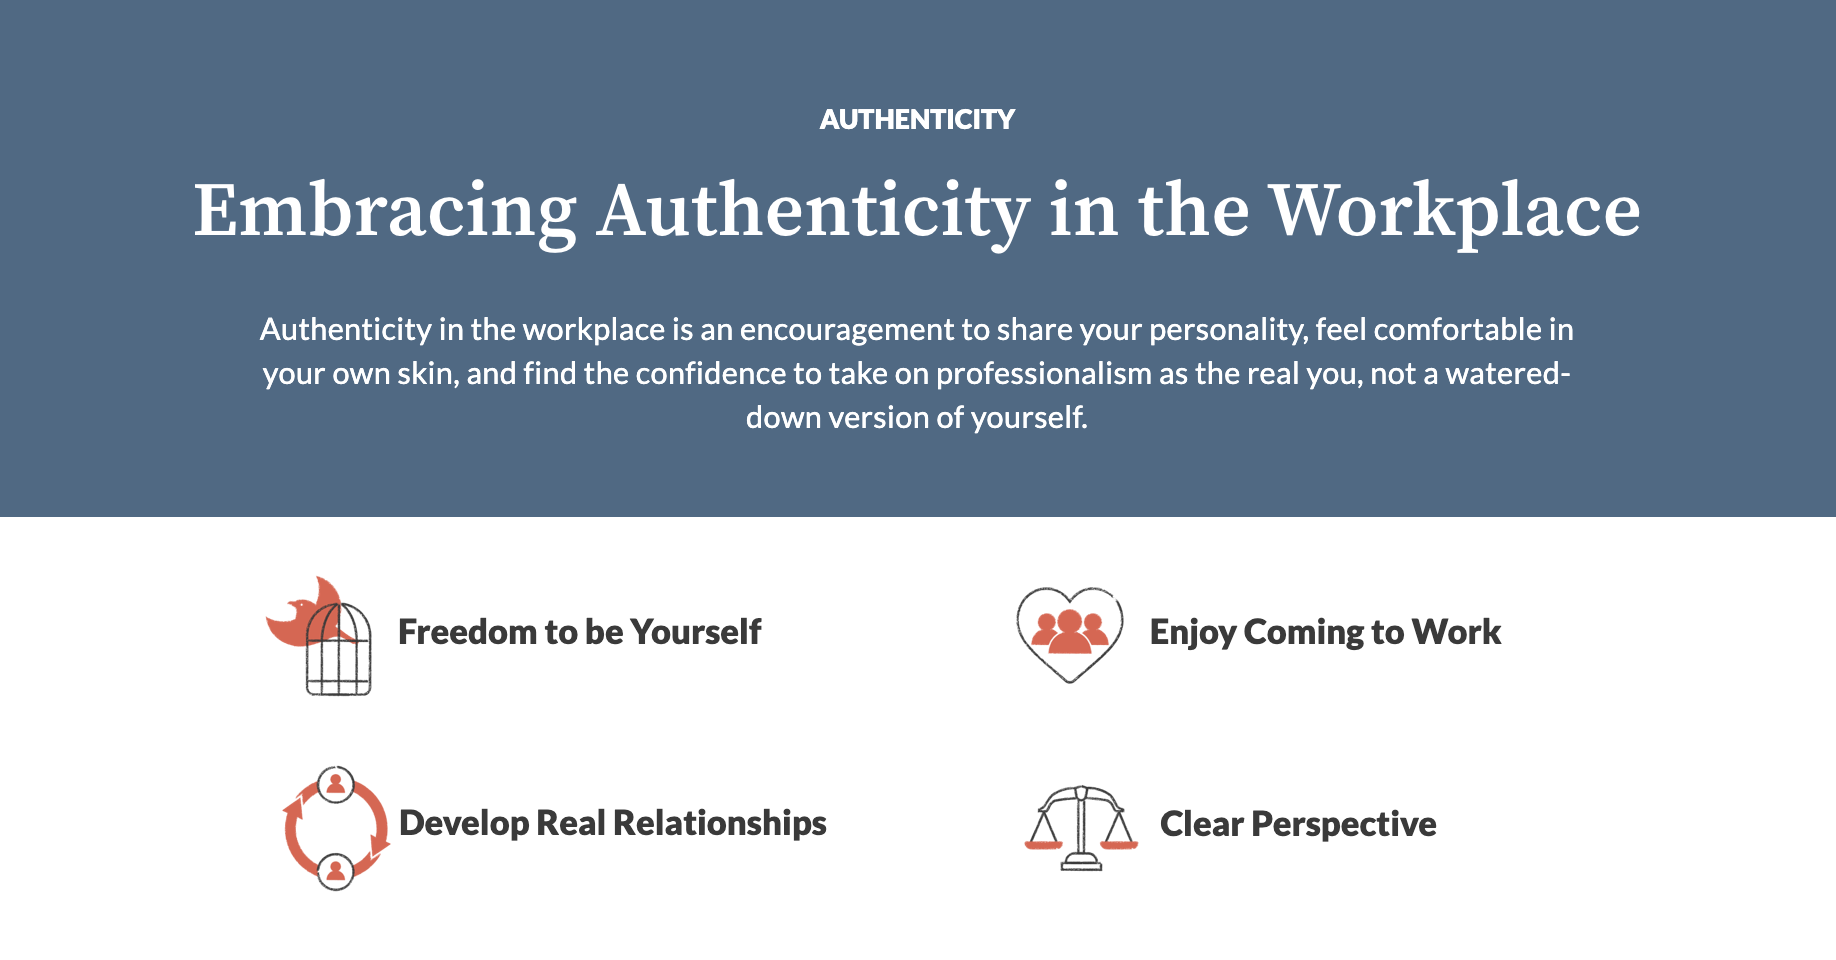 Embracing Authenticity in the Workplace